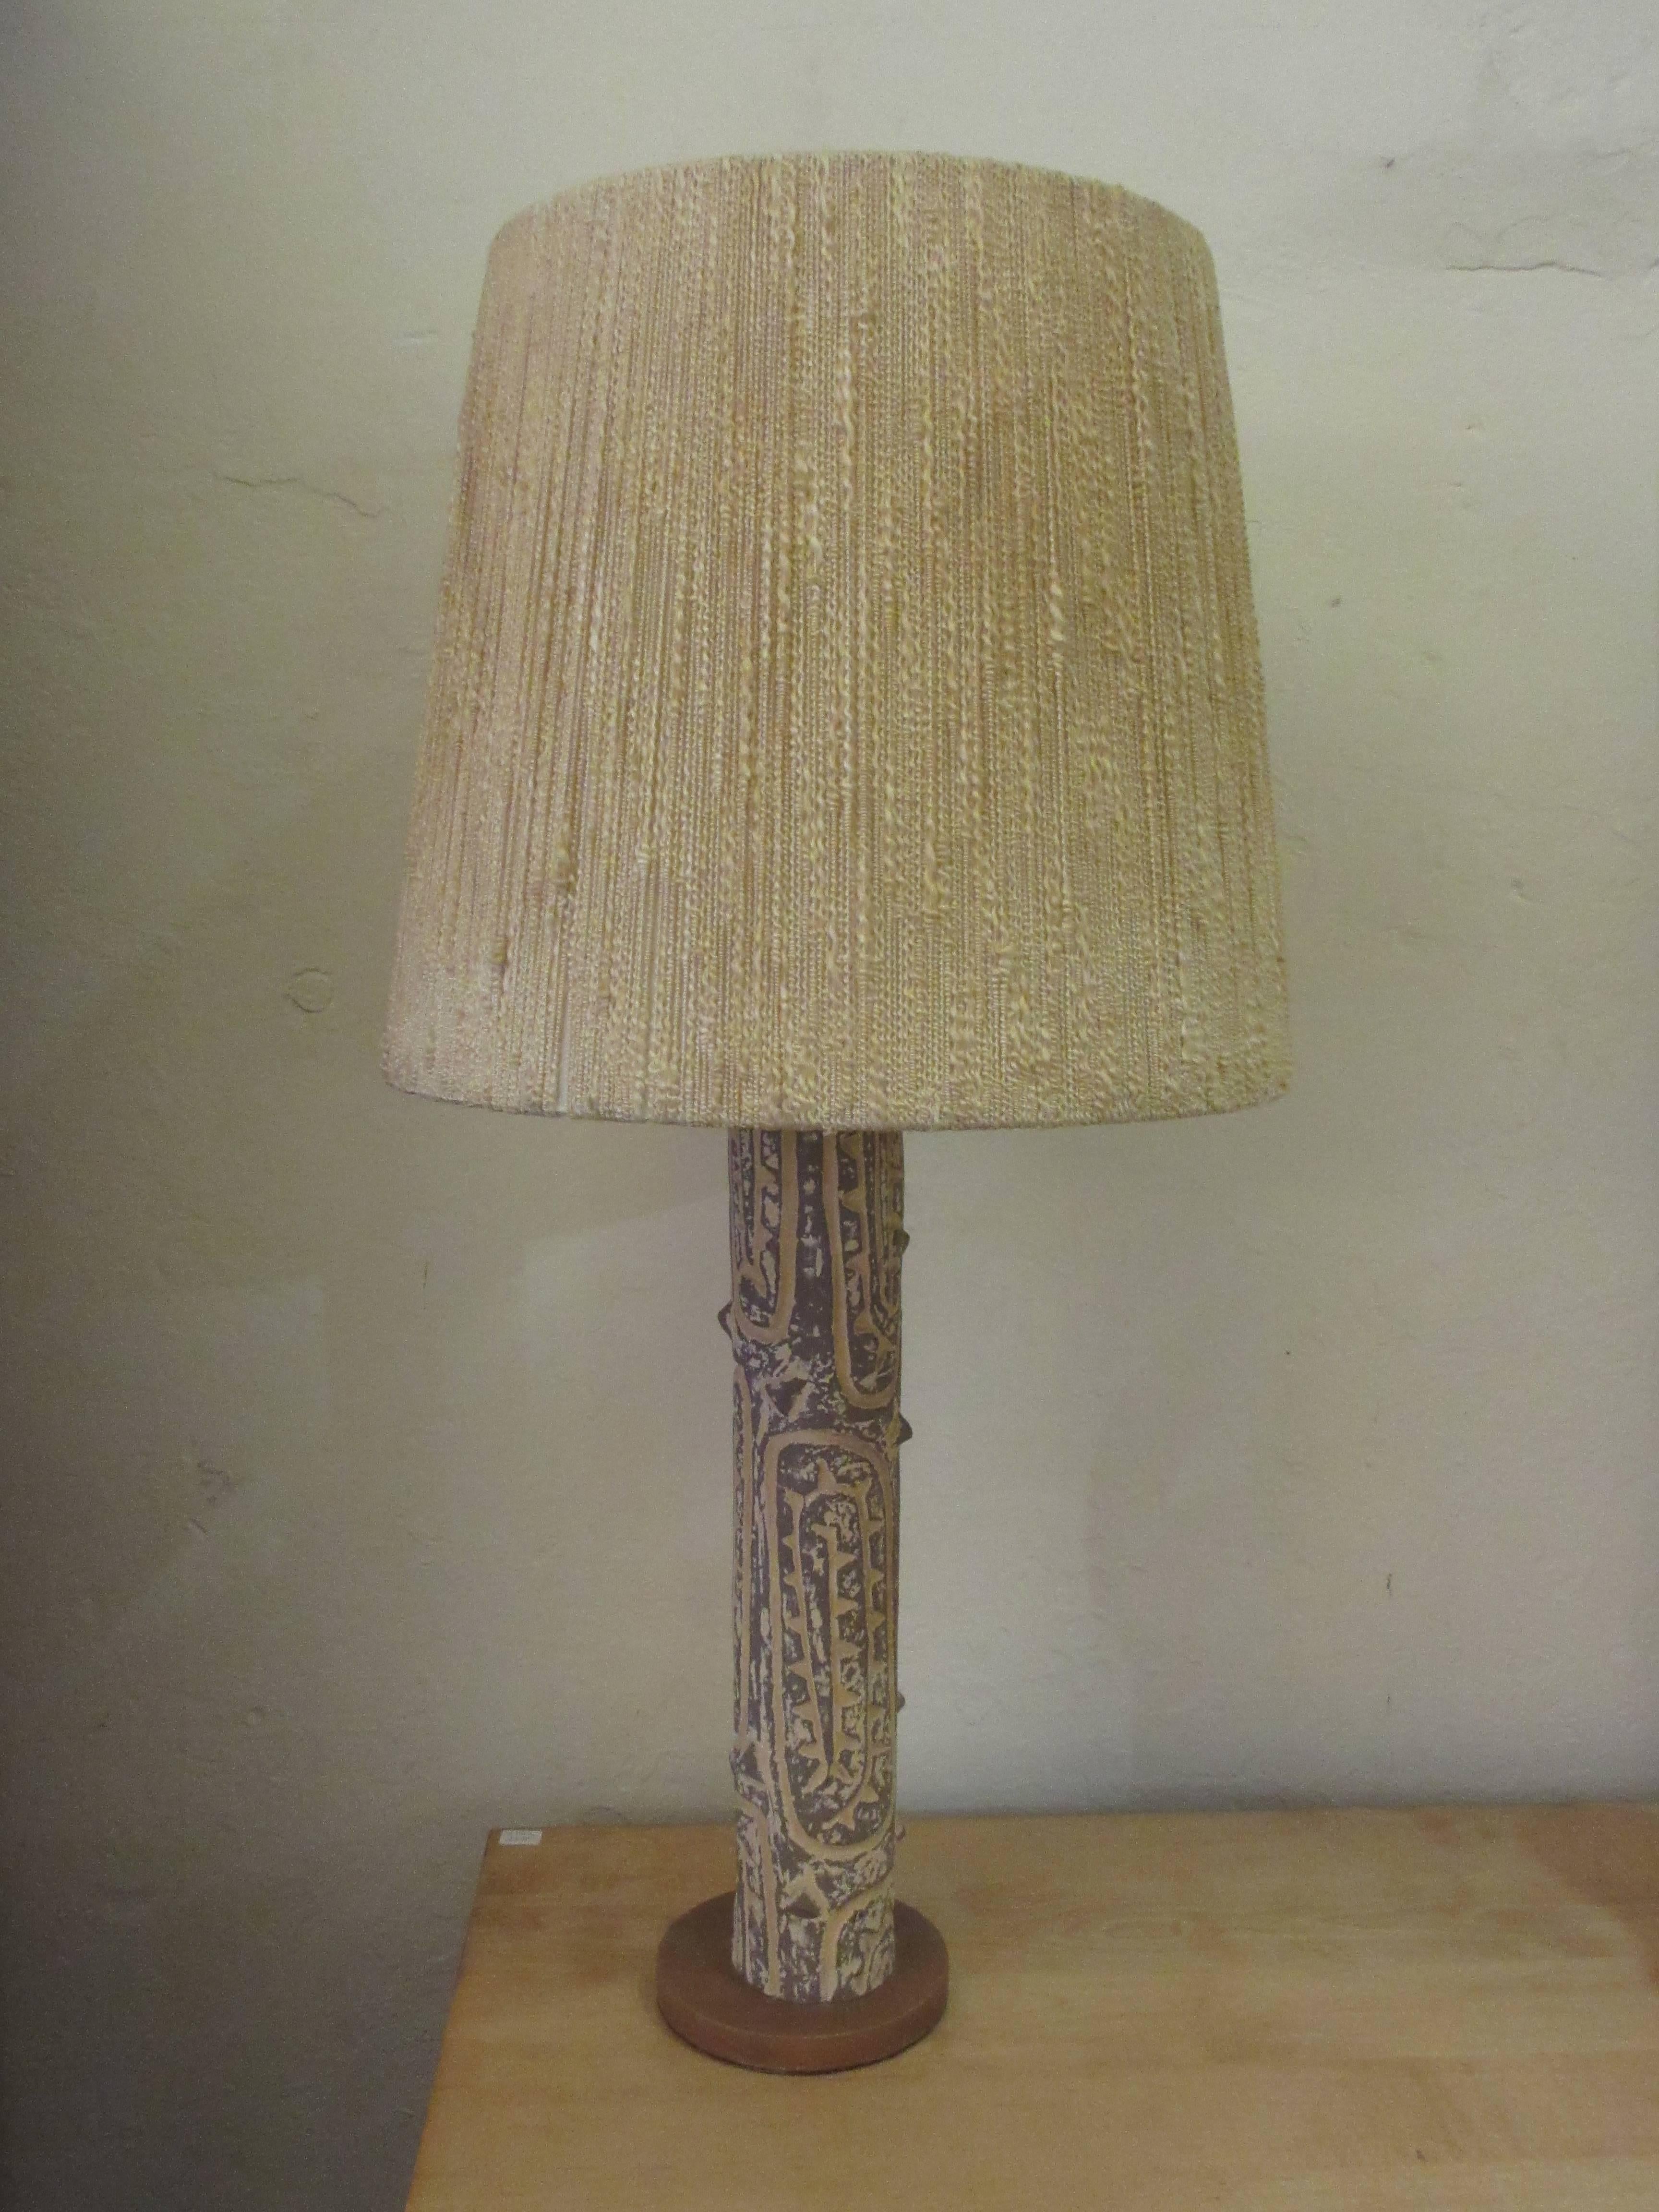 Unusual, tree trunk stylized table lamp with original shade. Ceramic lamp sits on a round wood base. With shade, lamp is 30